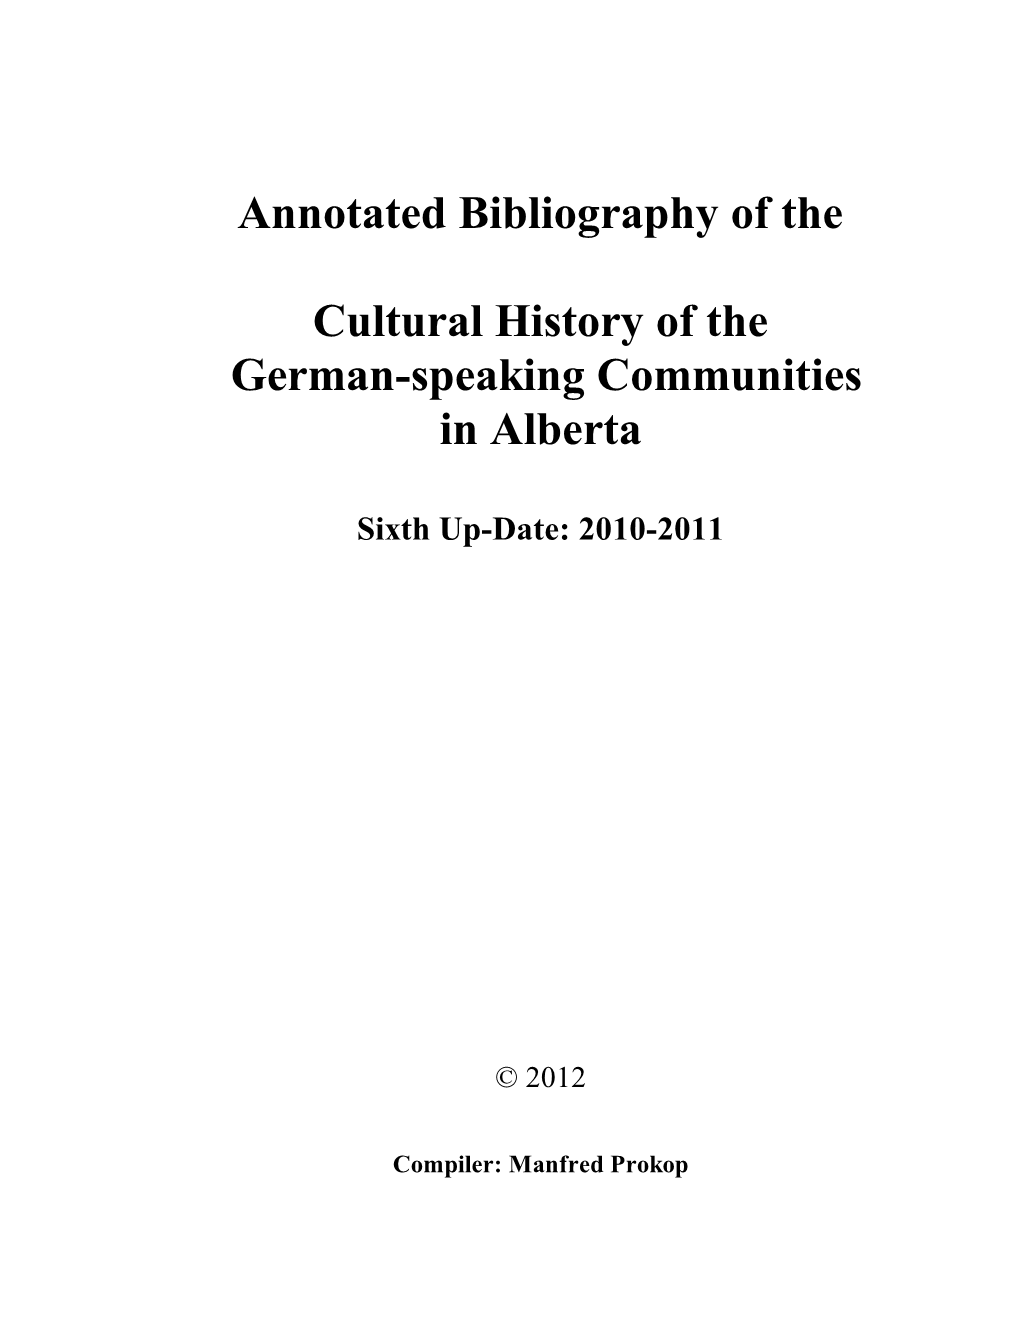 Annotated Bibliography of the Cultural History of the German-Speaking Community in Alberta: 1882-2012